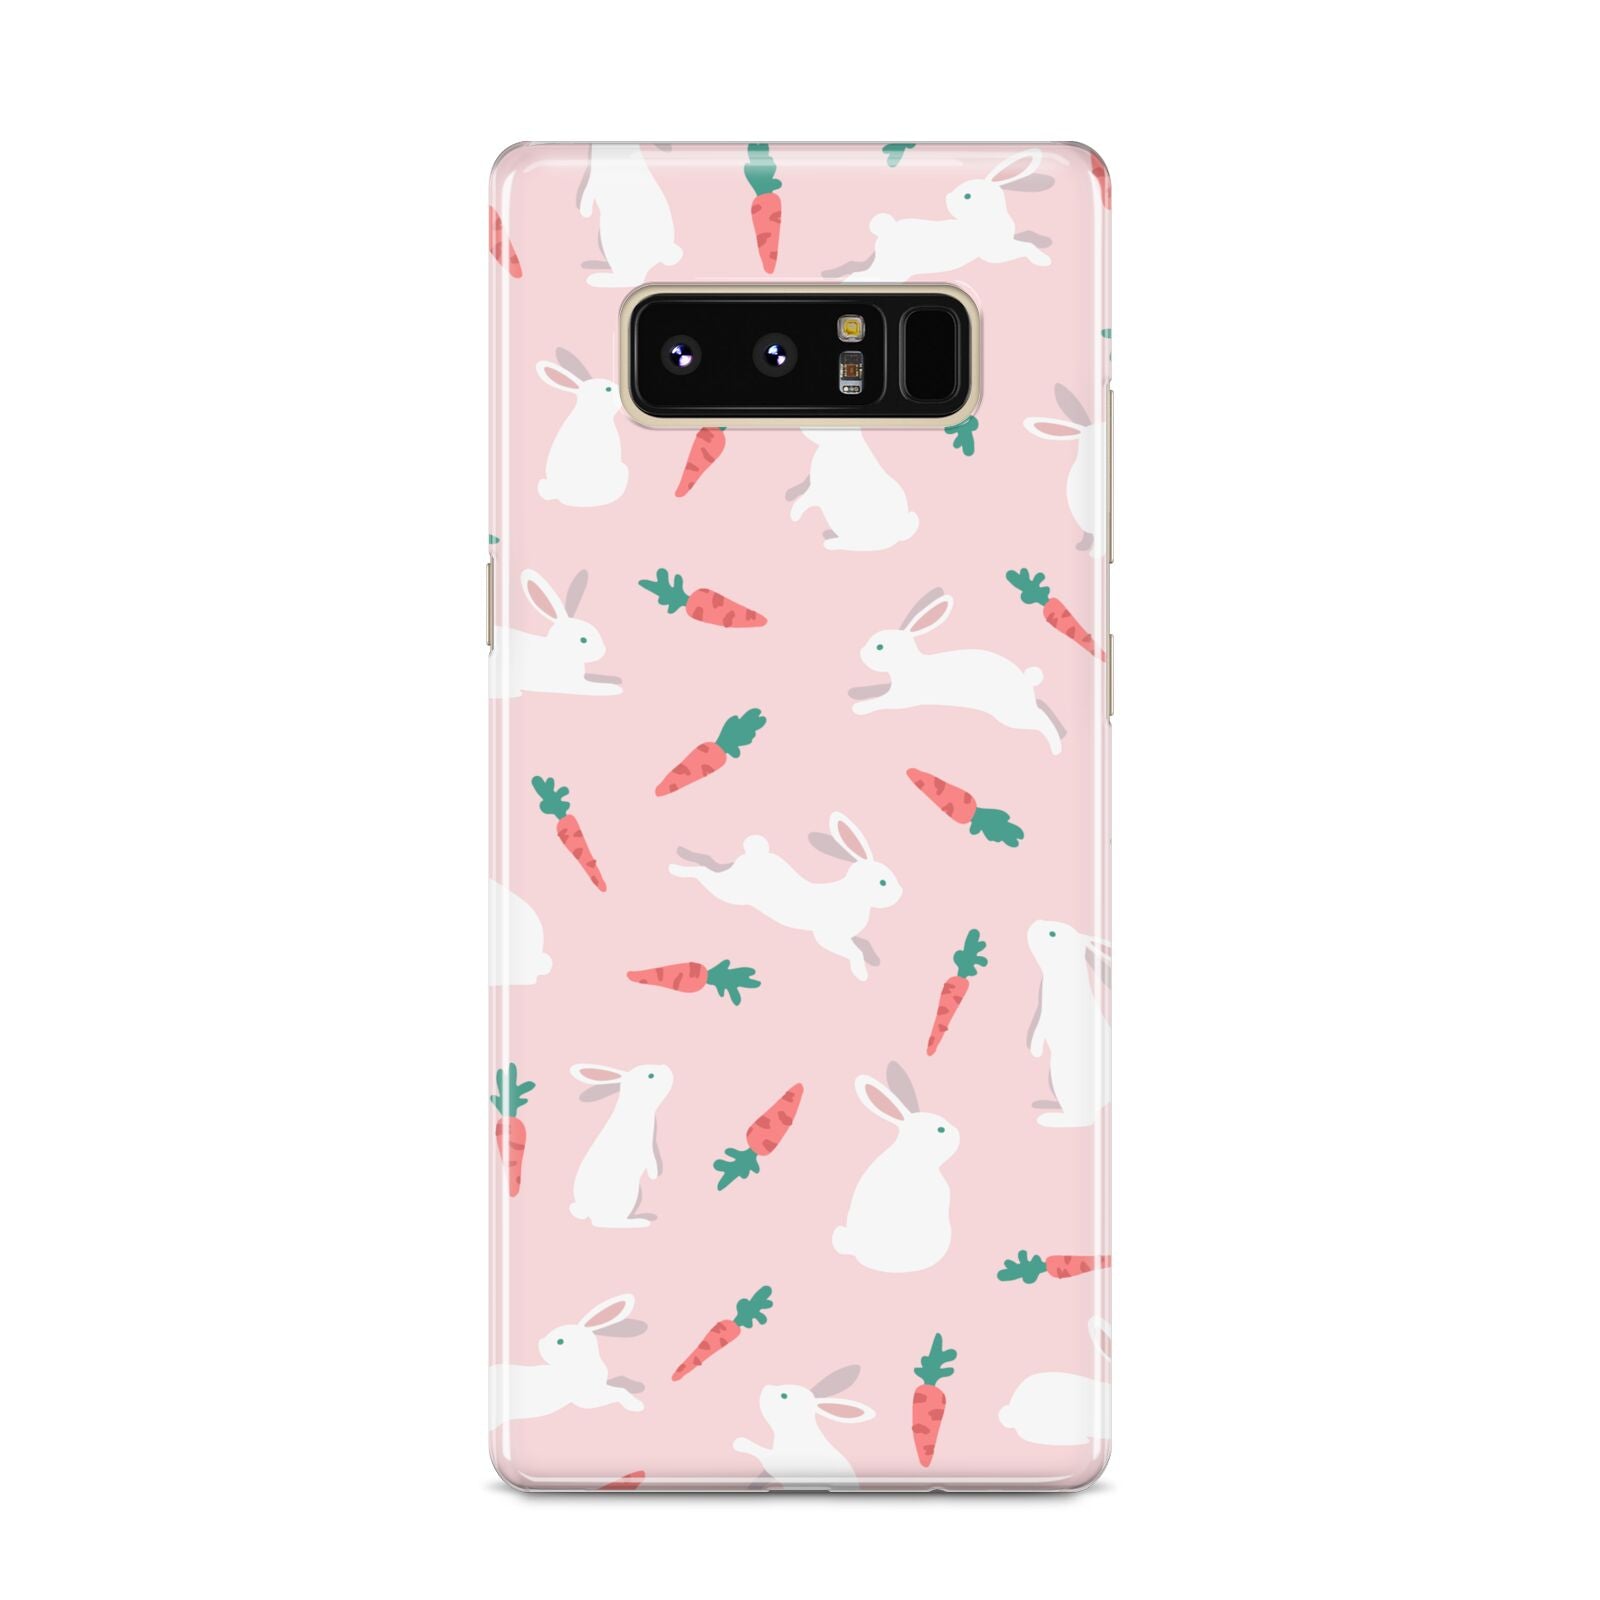 Easter Bunny And Carrot Samsung Galaxy S8 Case